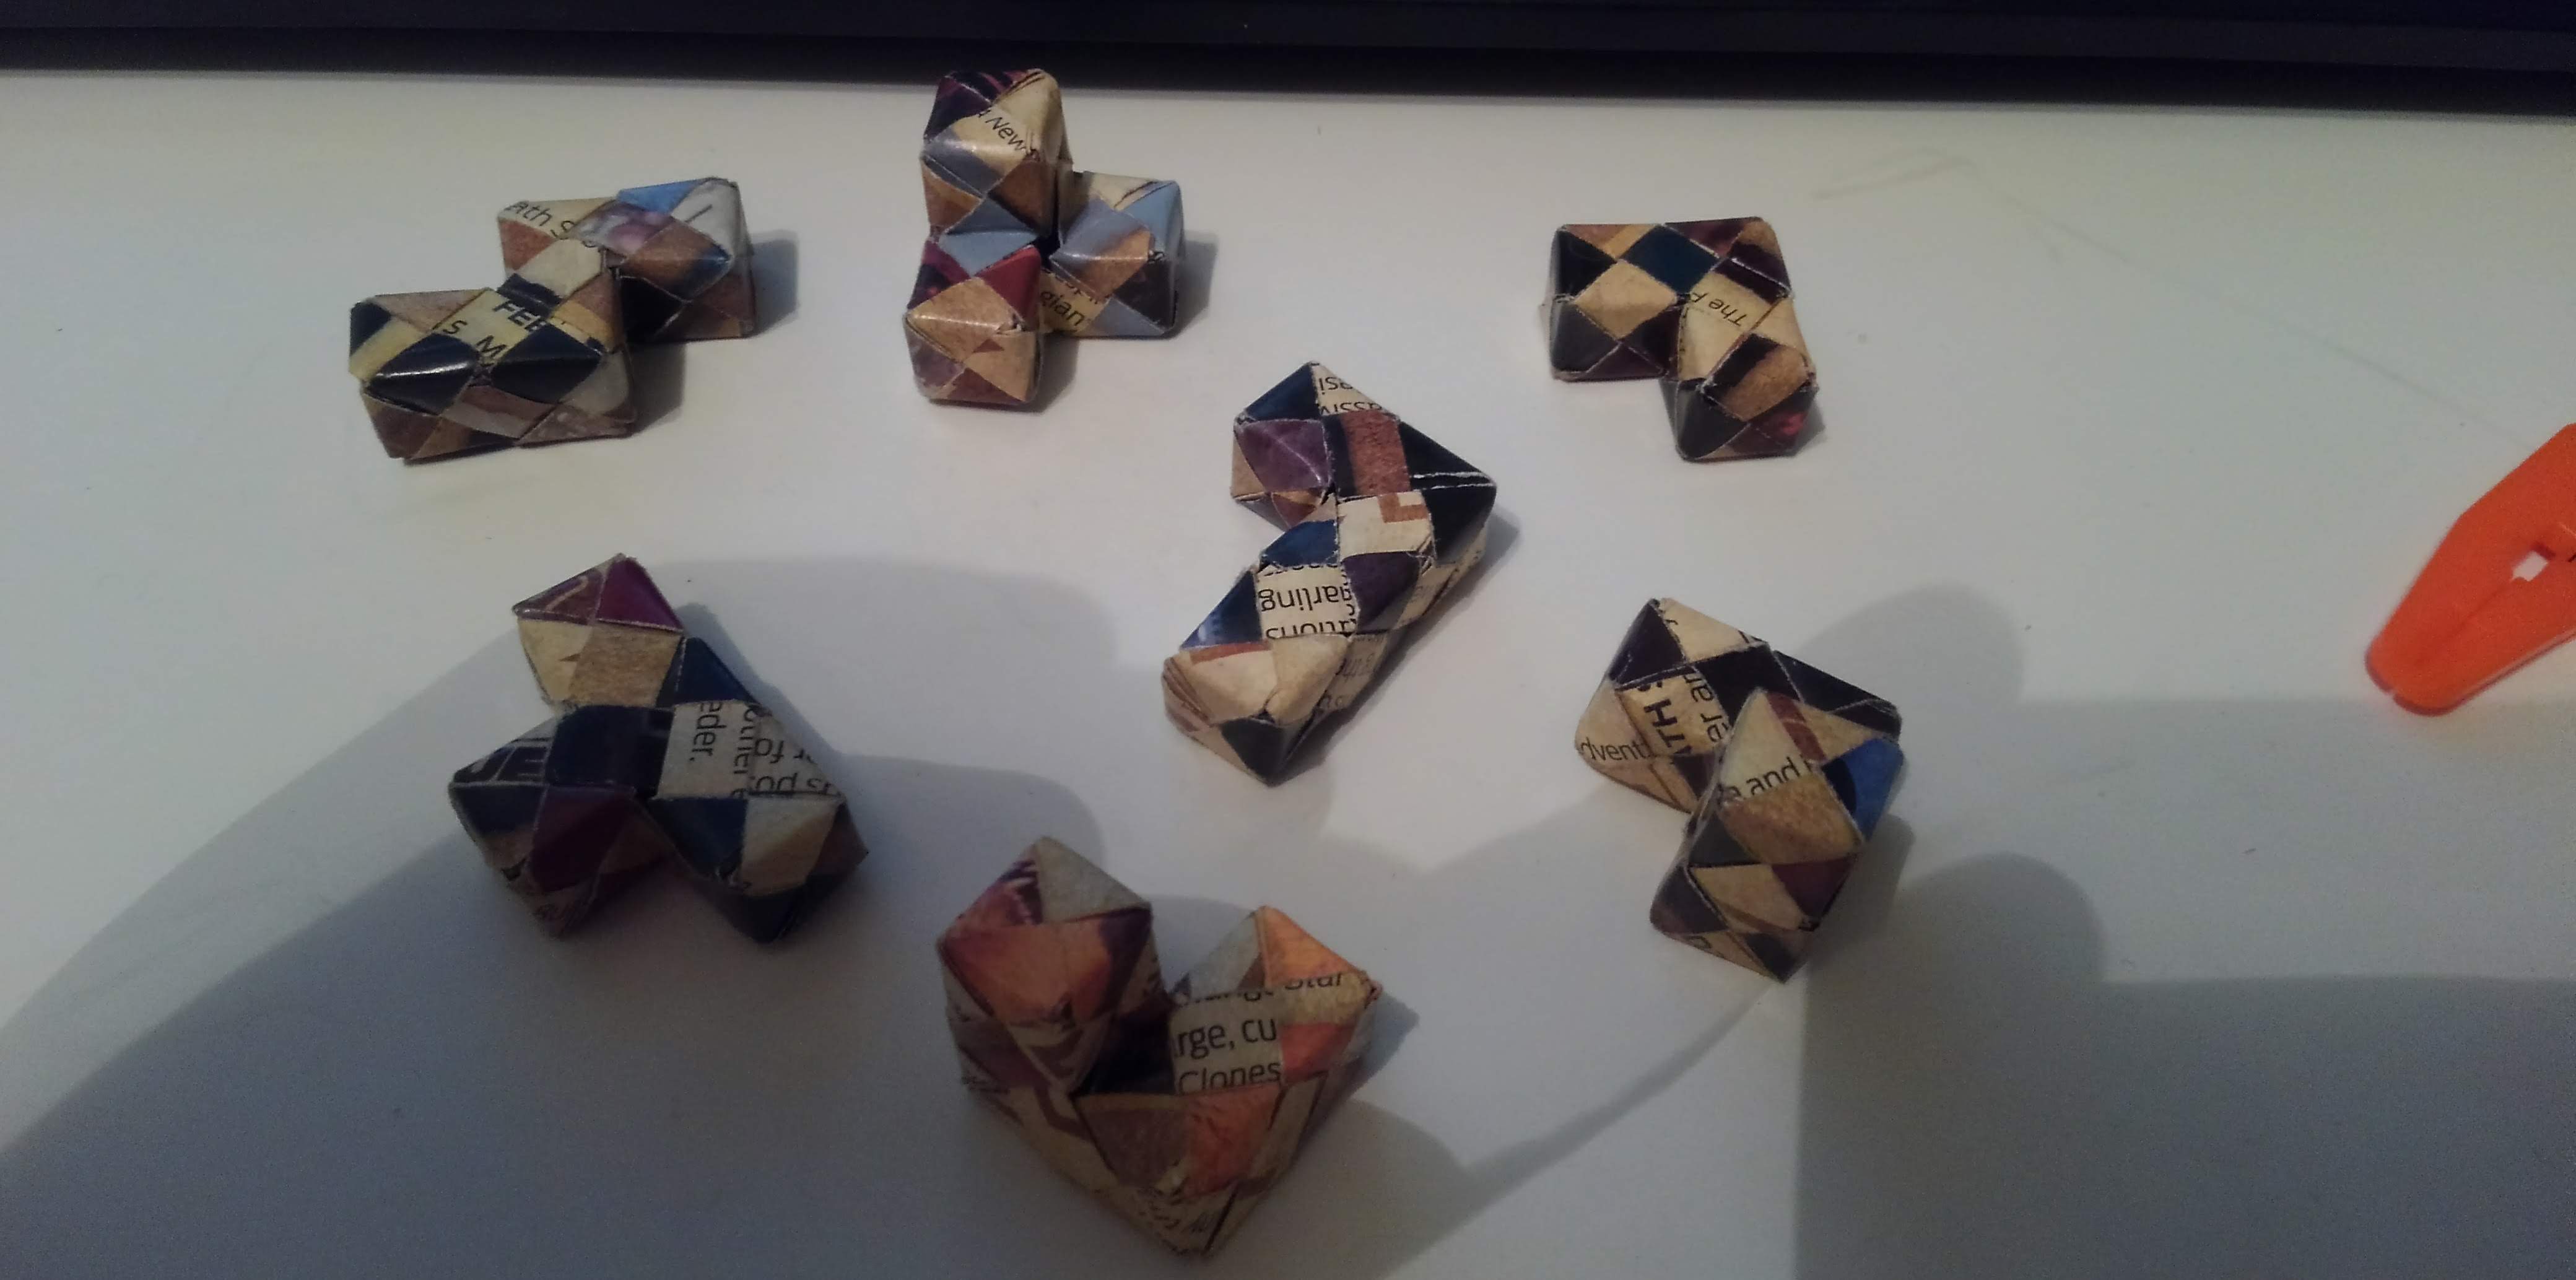 Seven pieces to a sonobe puzzle cube spread out on a table